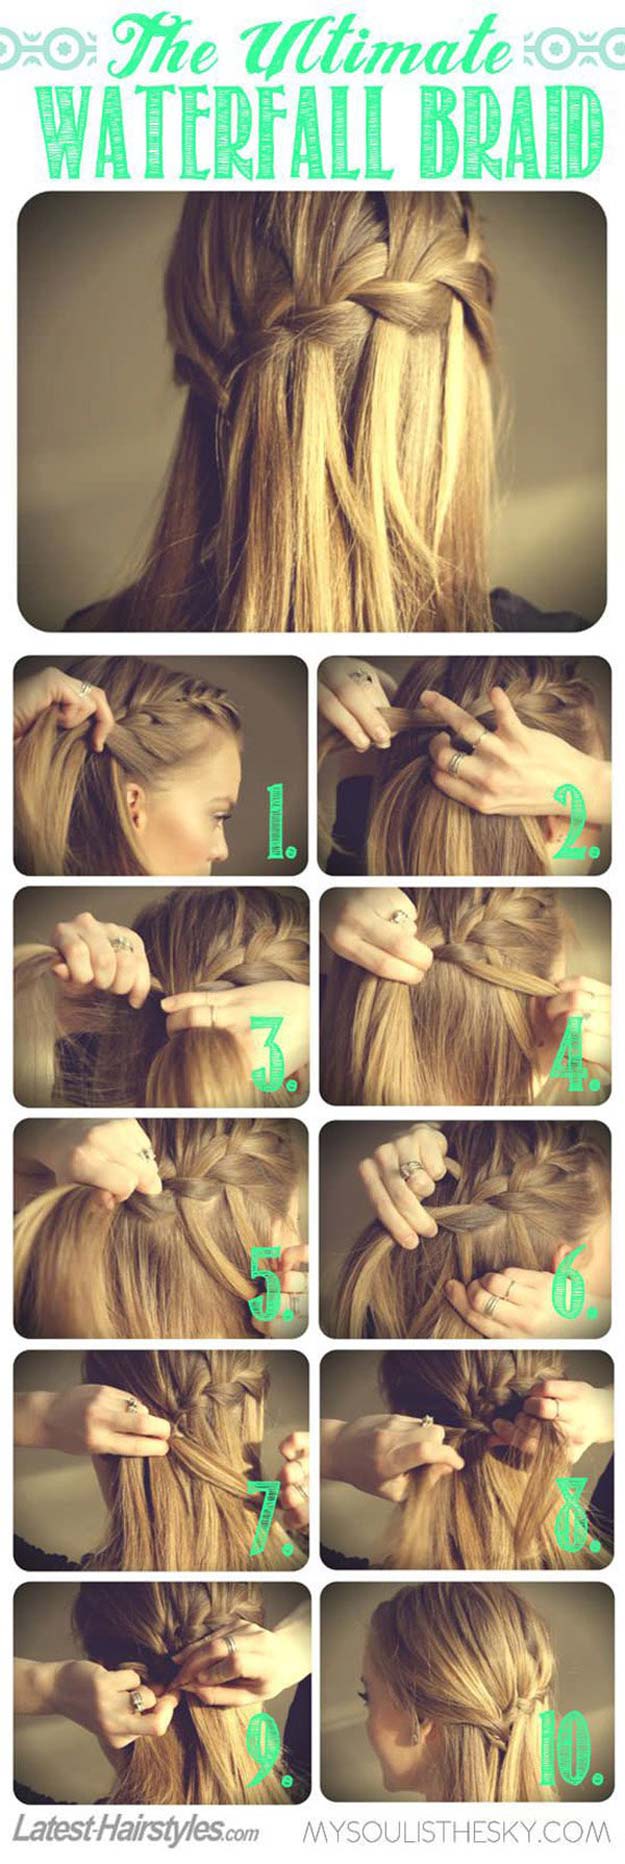 Best Hairstyles for Long Hair - Ultimate Waterfall Braid - Step by Step Tutorials for Easy Curls, Updo, Half Up, Braids and Lazy Girl Looks. Prom Ideas, Special Occasion Hair and Braiding Instructions for Teens, Teenagers and Adults, Women and Girls 